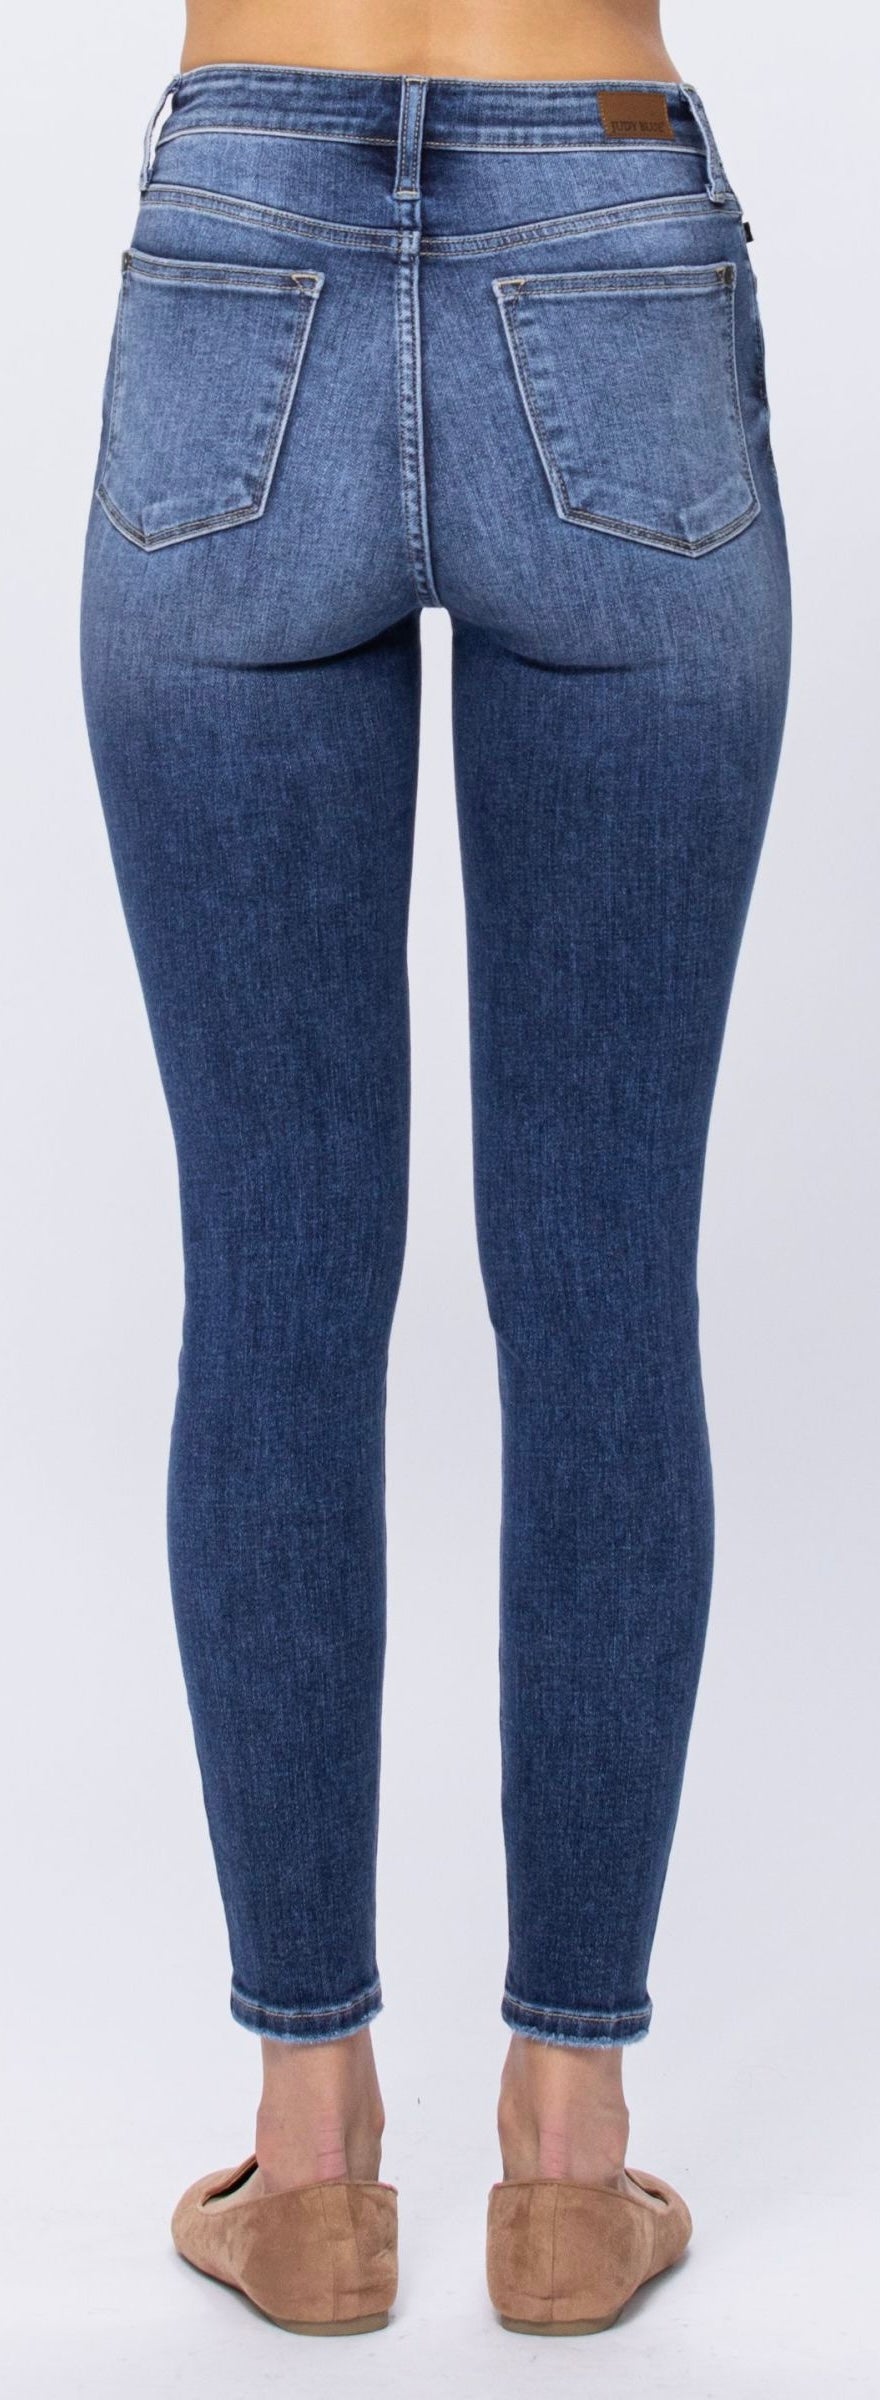 Reg/Plus 82319 Hi Rise Button Fly Skinny Jeans by Judy Blue